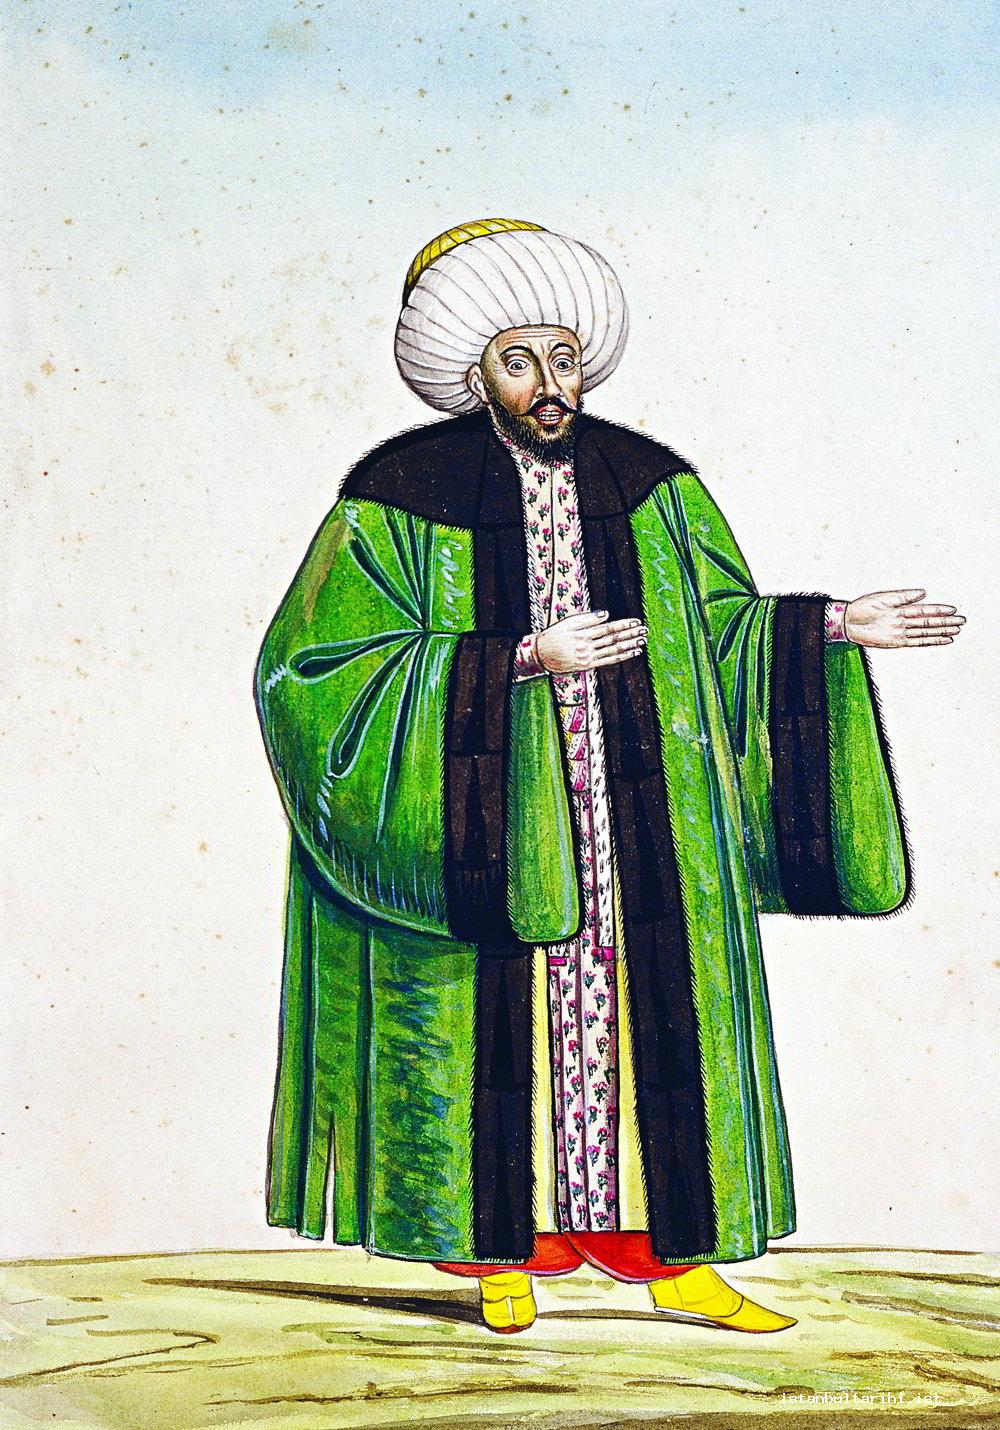 7- Chief Physician (Topkapı Palace Museum Archive, no. 3690)